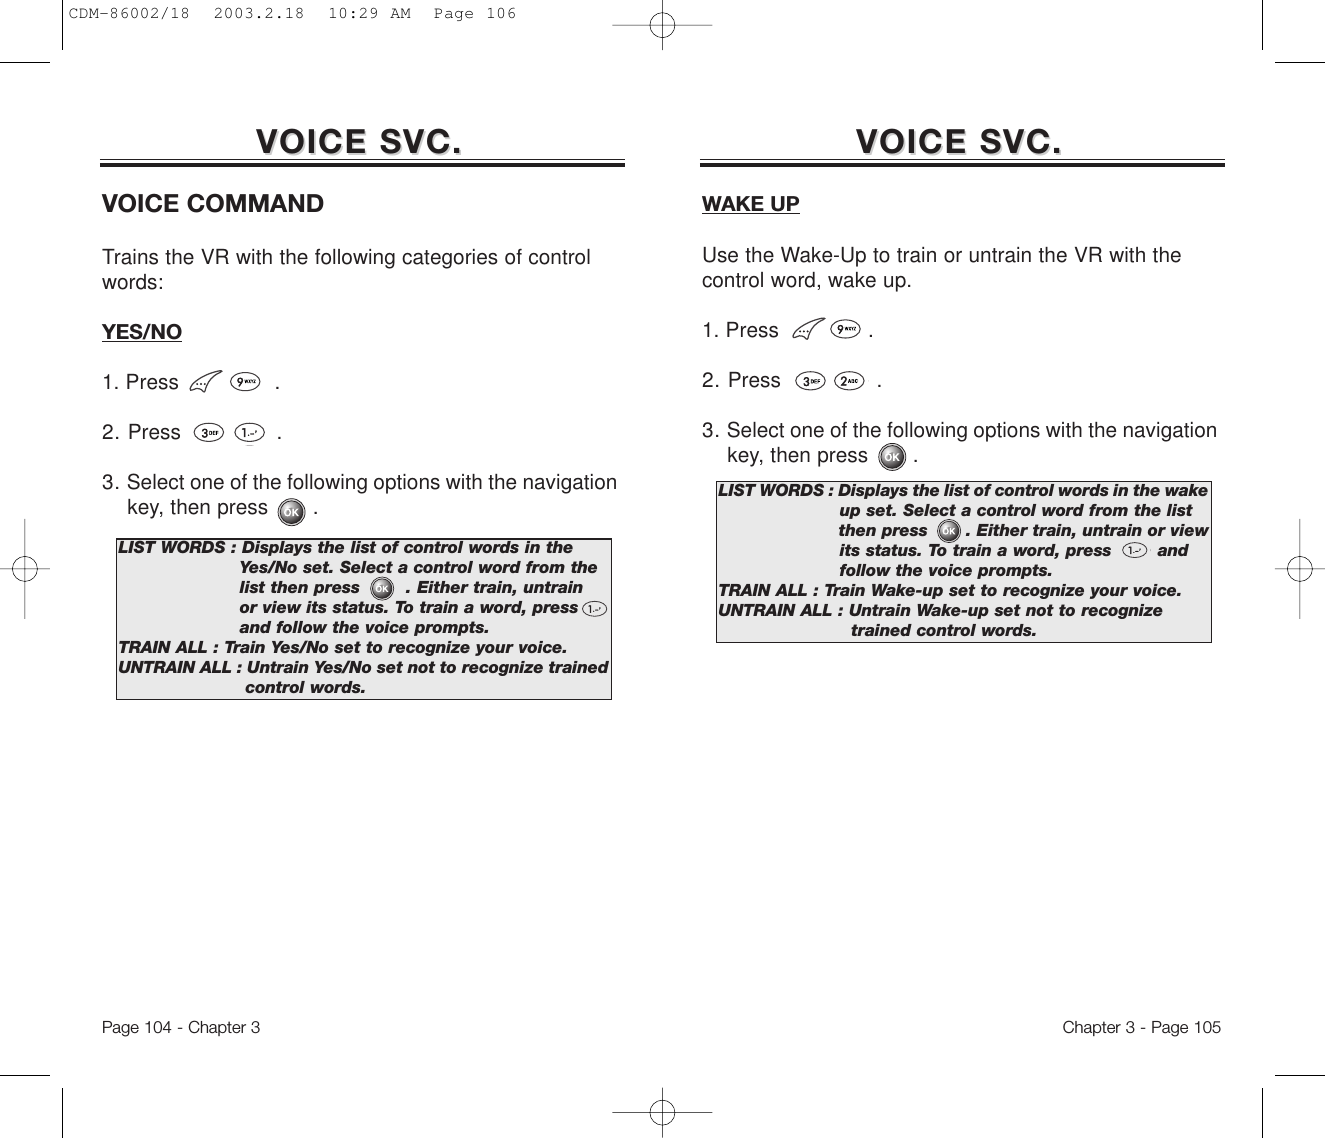 Chapter 3 - Page 105Page 104 - Chapter 3VOICE SVC.VOICE SVC. VOICE SVC.VOICE SVC.VOICE COMMANDTrains the VR with the following categories of controlwords: YES/NO1. Press               .2. Press               .3. Select one of the following options with the navigation key, then press       .LIST WORDS : Displays the list of control words in the Yes/No set. Select a control word from the list then press        . Either train, untrain or view its status. To train a word, press   and follow the voice prompts.TRAIN ALL : Train Yes/No set to recognize your voice.UNTRAIN ALL : Untrain Yes/No set not to recognize trained control words.WAKE UPUse the Wake-Up to train or untrain the VR with thecontrol word, wake up.1. Press              .2. Press               .3. Select one of the following options with the navigation key, then press       .LIST WORDS : Displays the list of control words in the wake up set. Select a control word from the list then press       . Either train, untrain or view its status. To train a word, press        andfollow the voice prompts.TRAIN ALL : Train Wake-up set to recognize your voice.UNTRAIN ALL : Untrain Wake-up set not to recognize trained control words.CDM-86002/18  2003.2.18  10:29 AM  Page 106